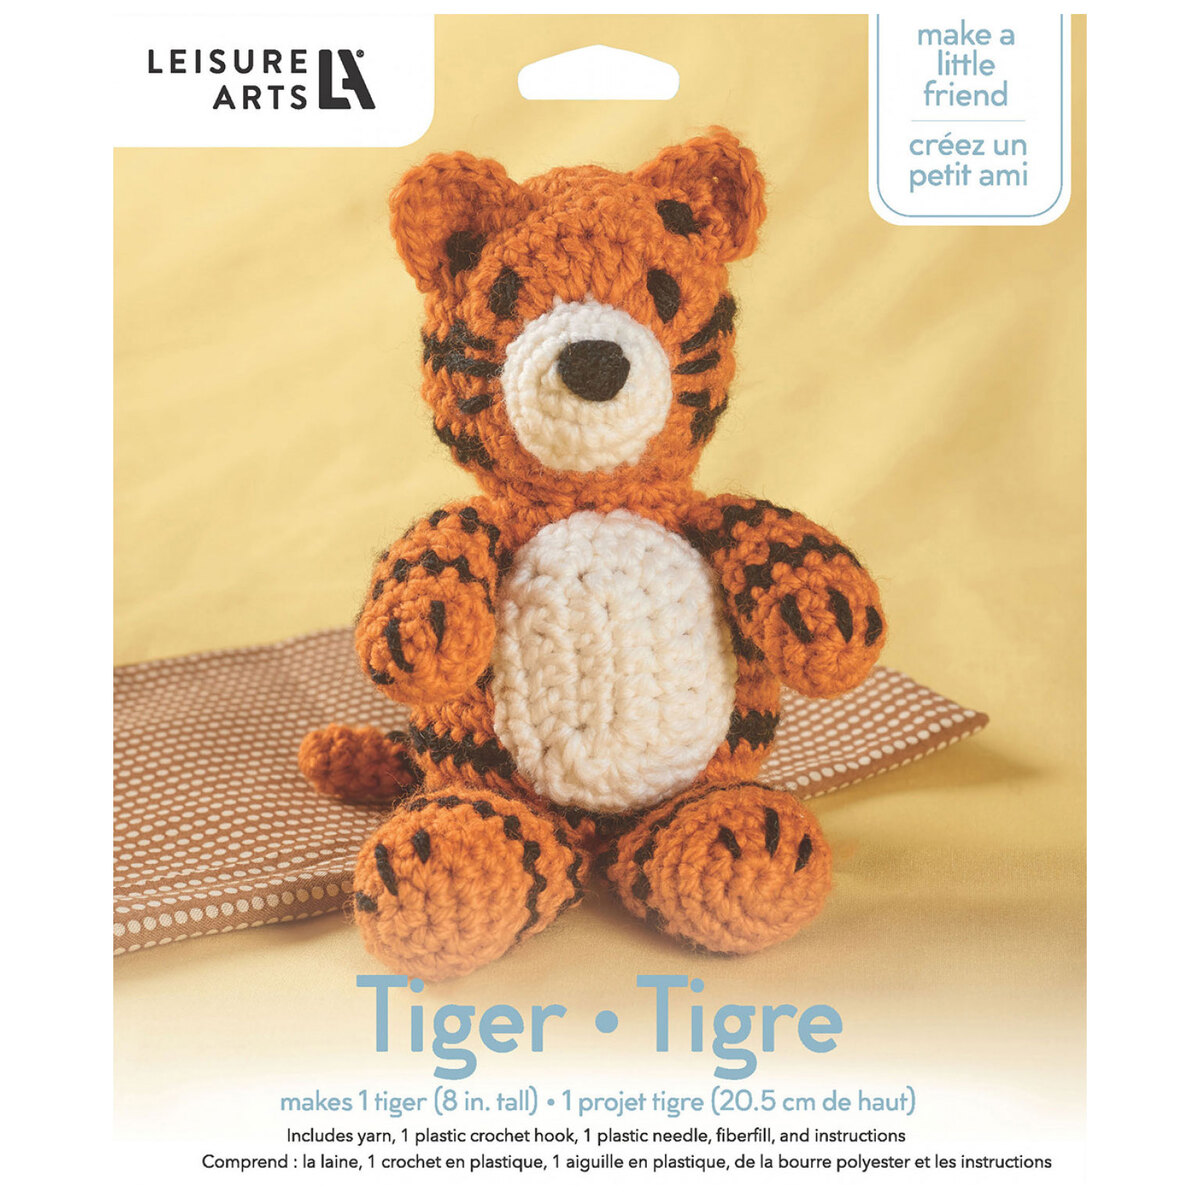 Leisure Arts Pudgies Animals Crochet Kit, Birdy, 3, Complete Crochet kit,  Learn to Crochet Animal Starter kit for All Ages, Includes Instructions,  DIY amigurumi Crochet Kits